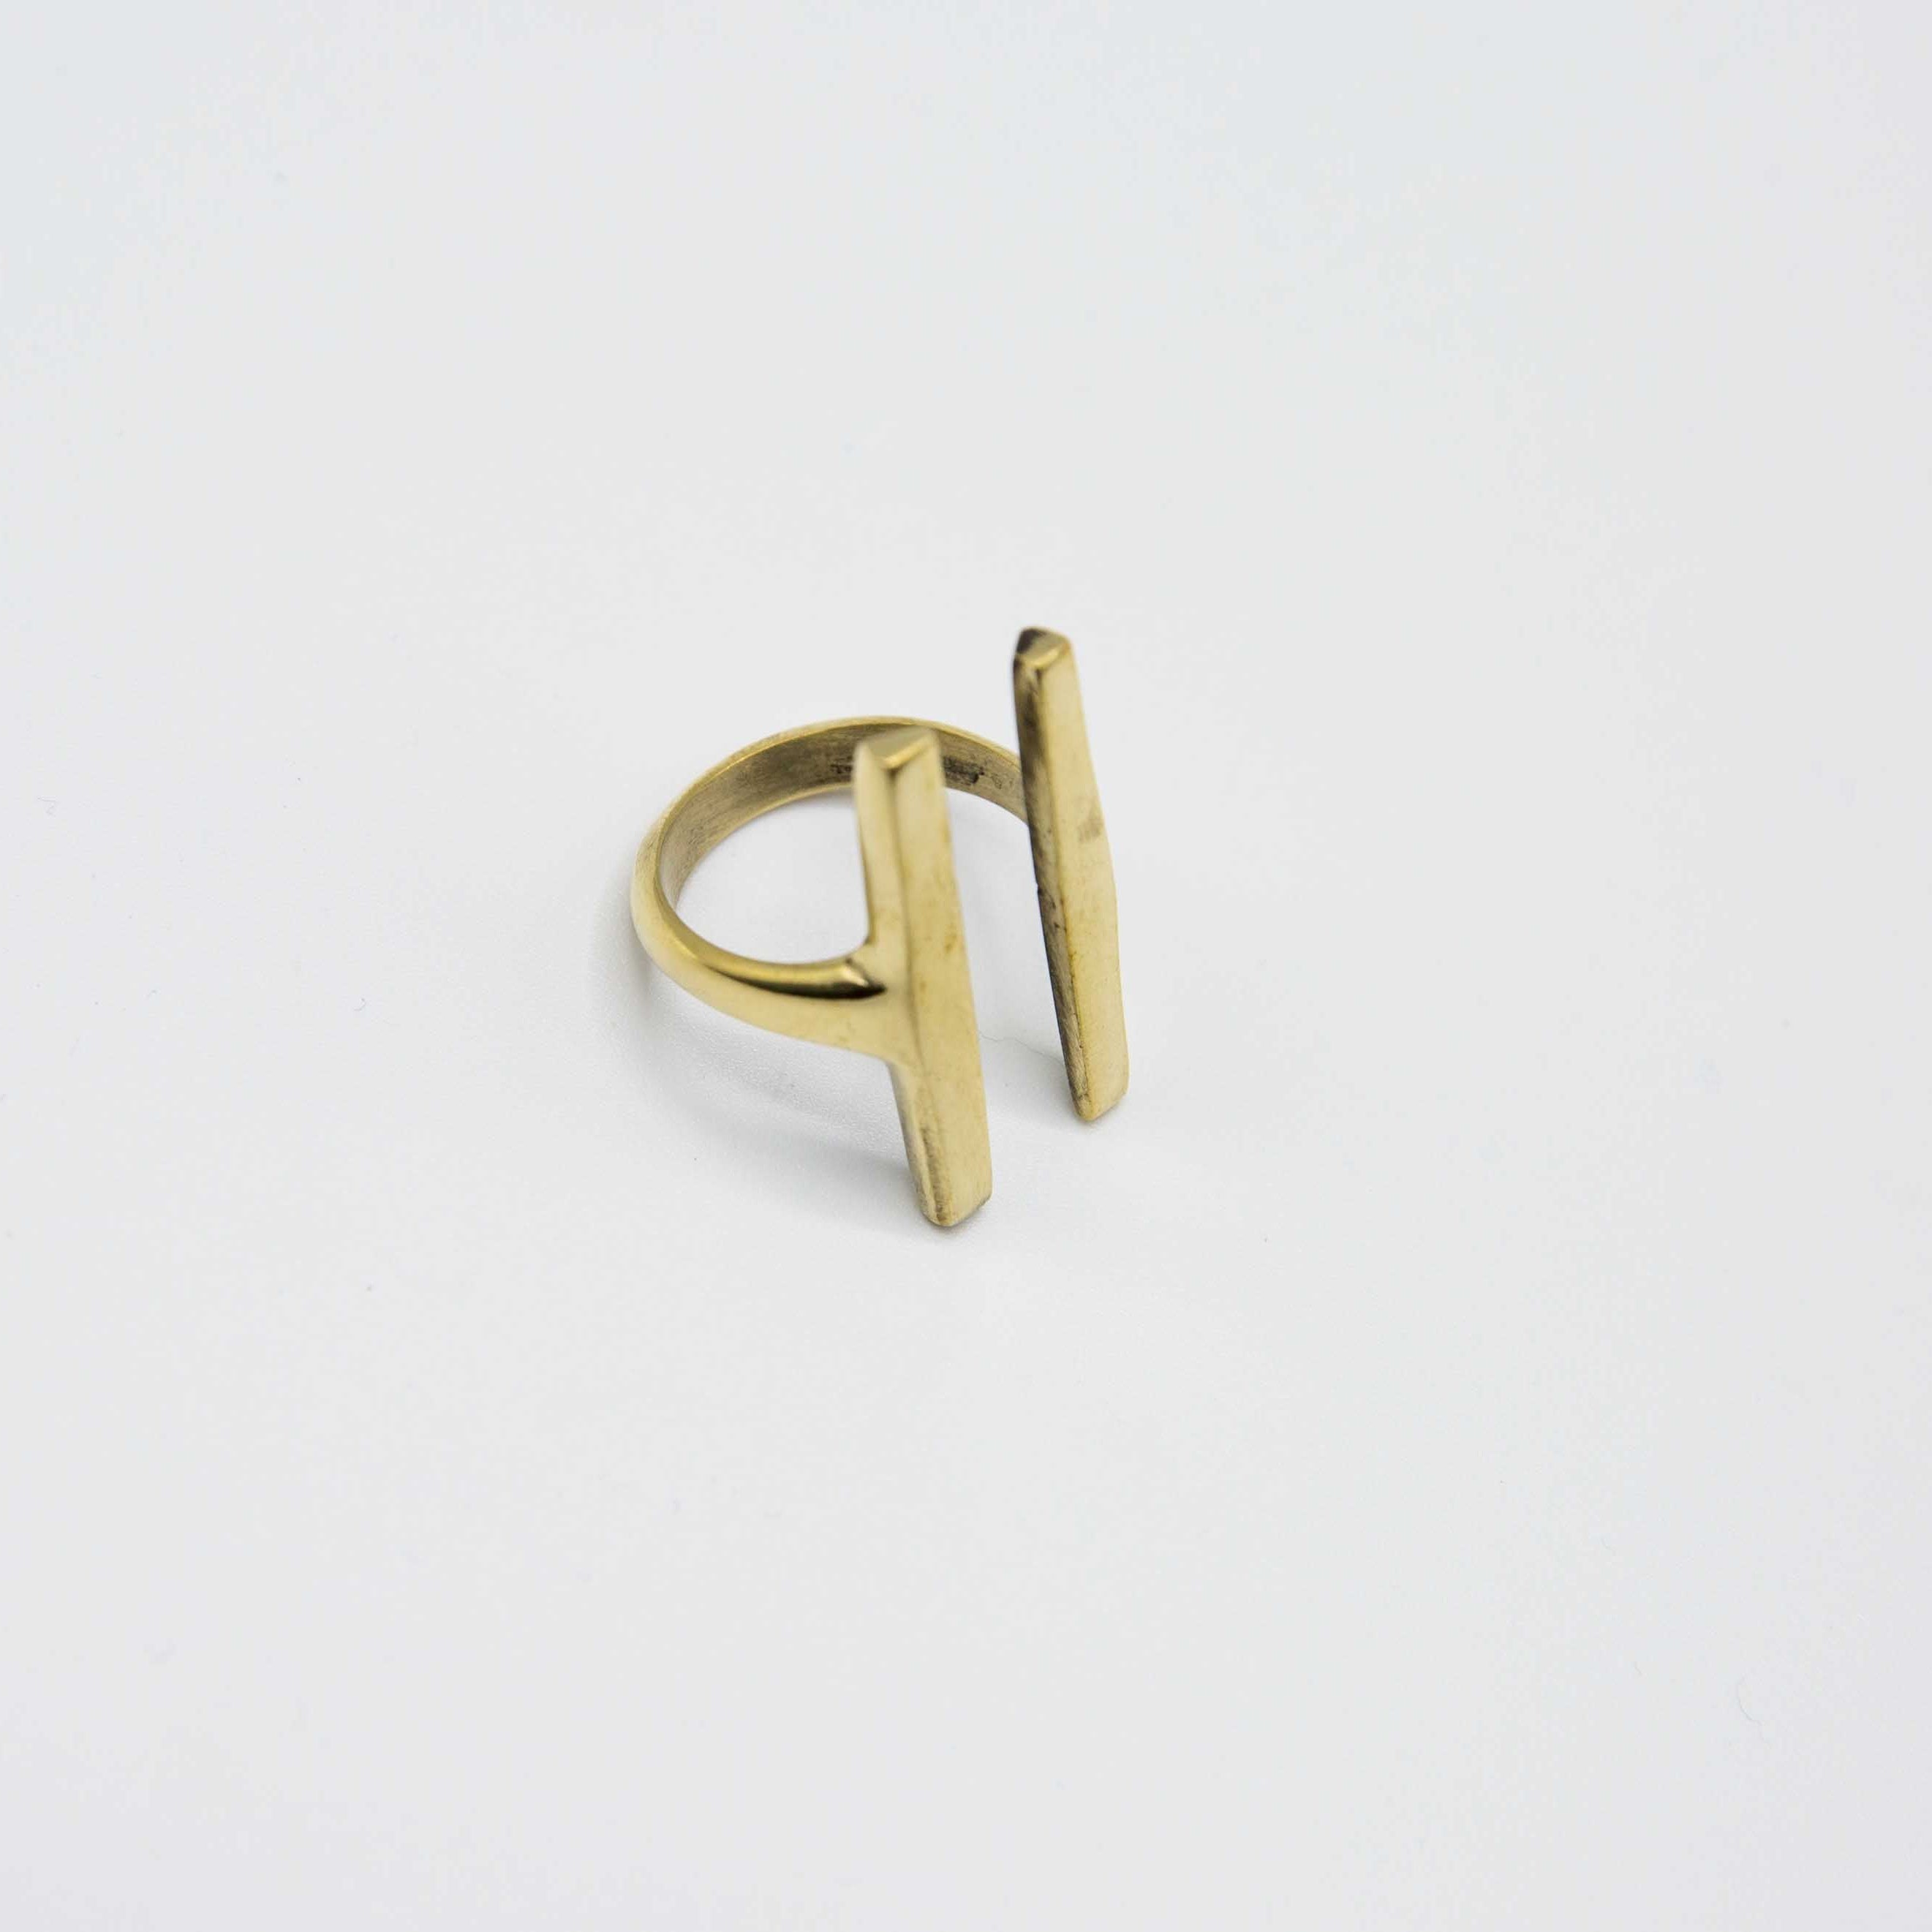 Parallel Bar Ring - Kenyan materials and design for a fair trade boutique